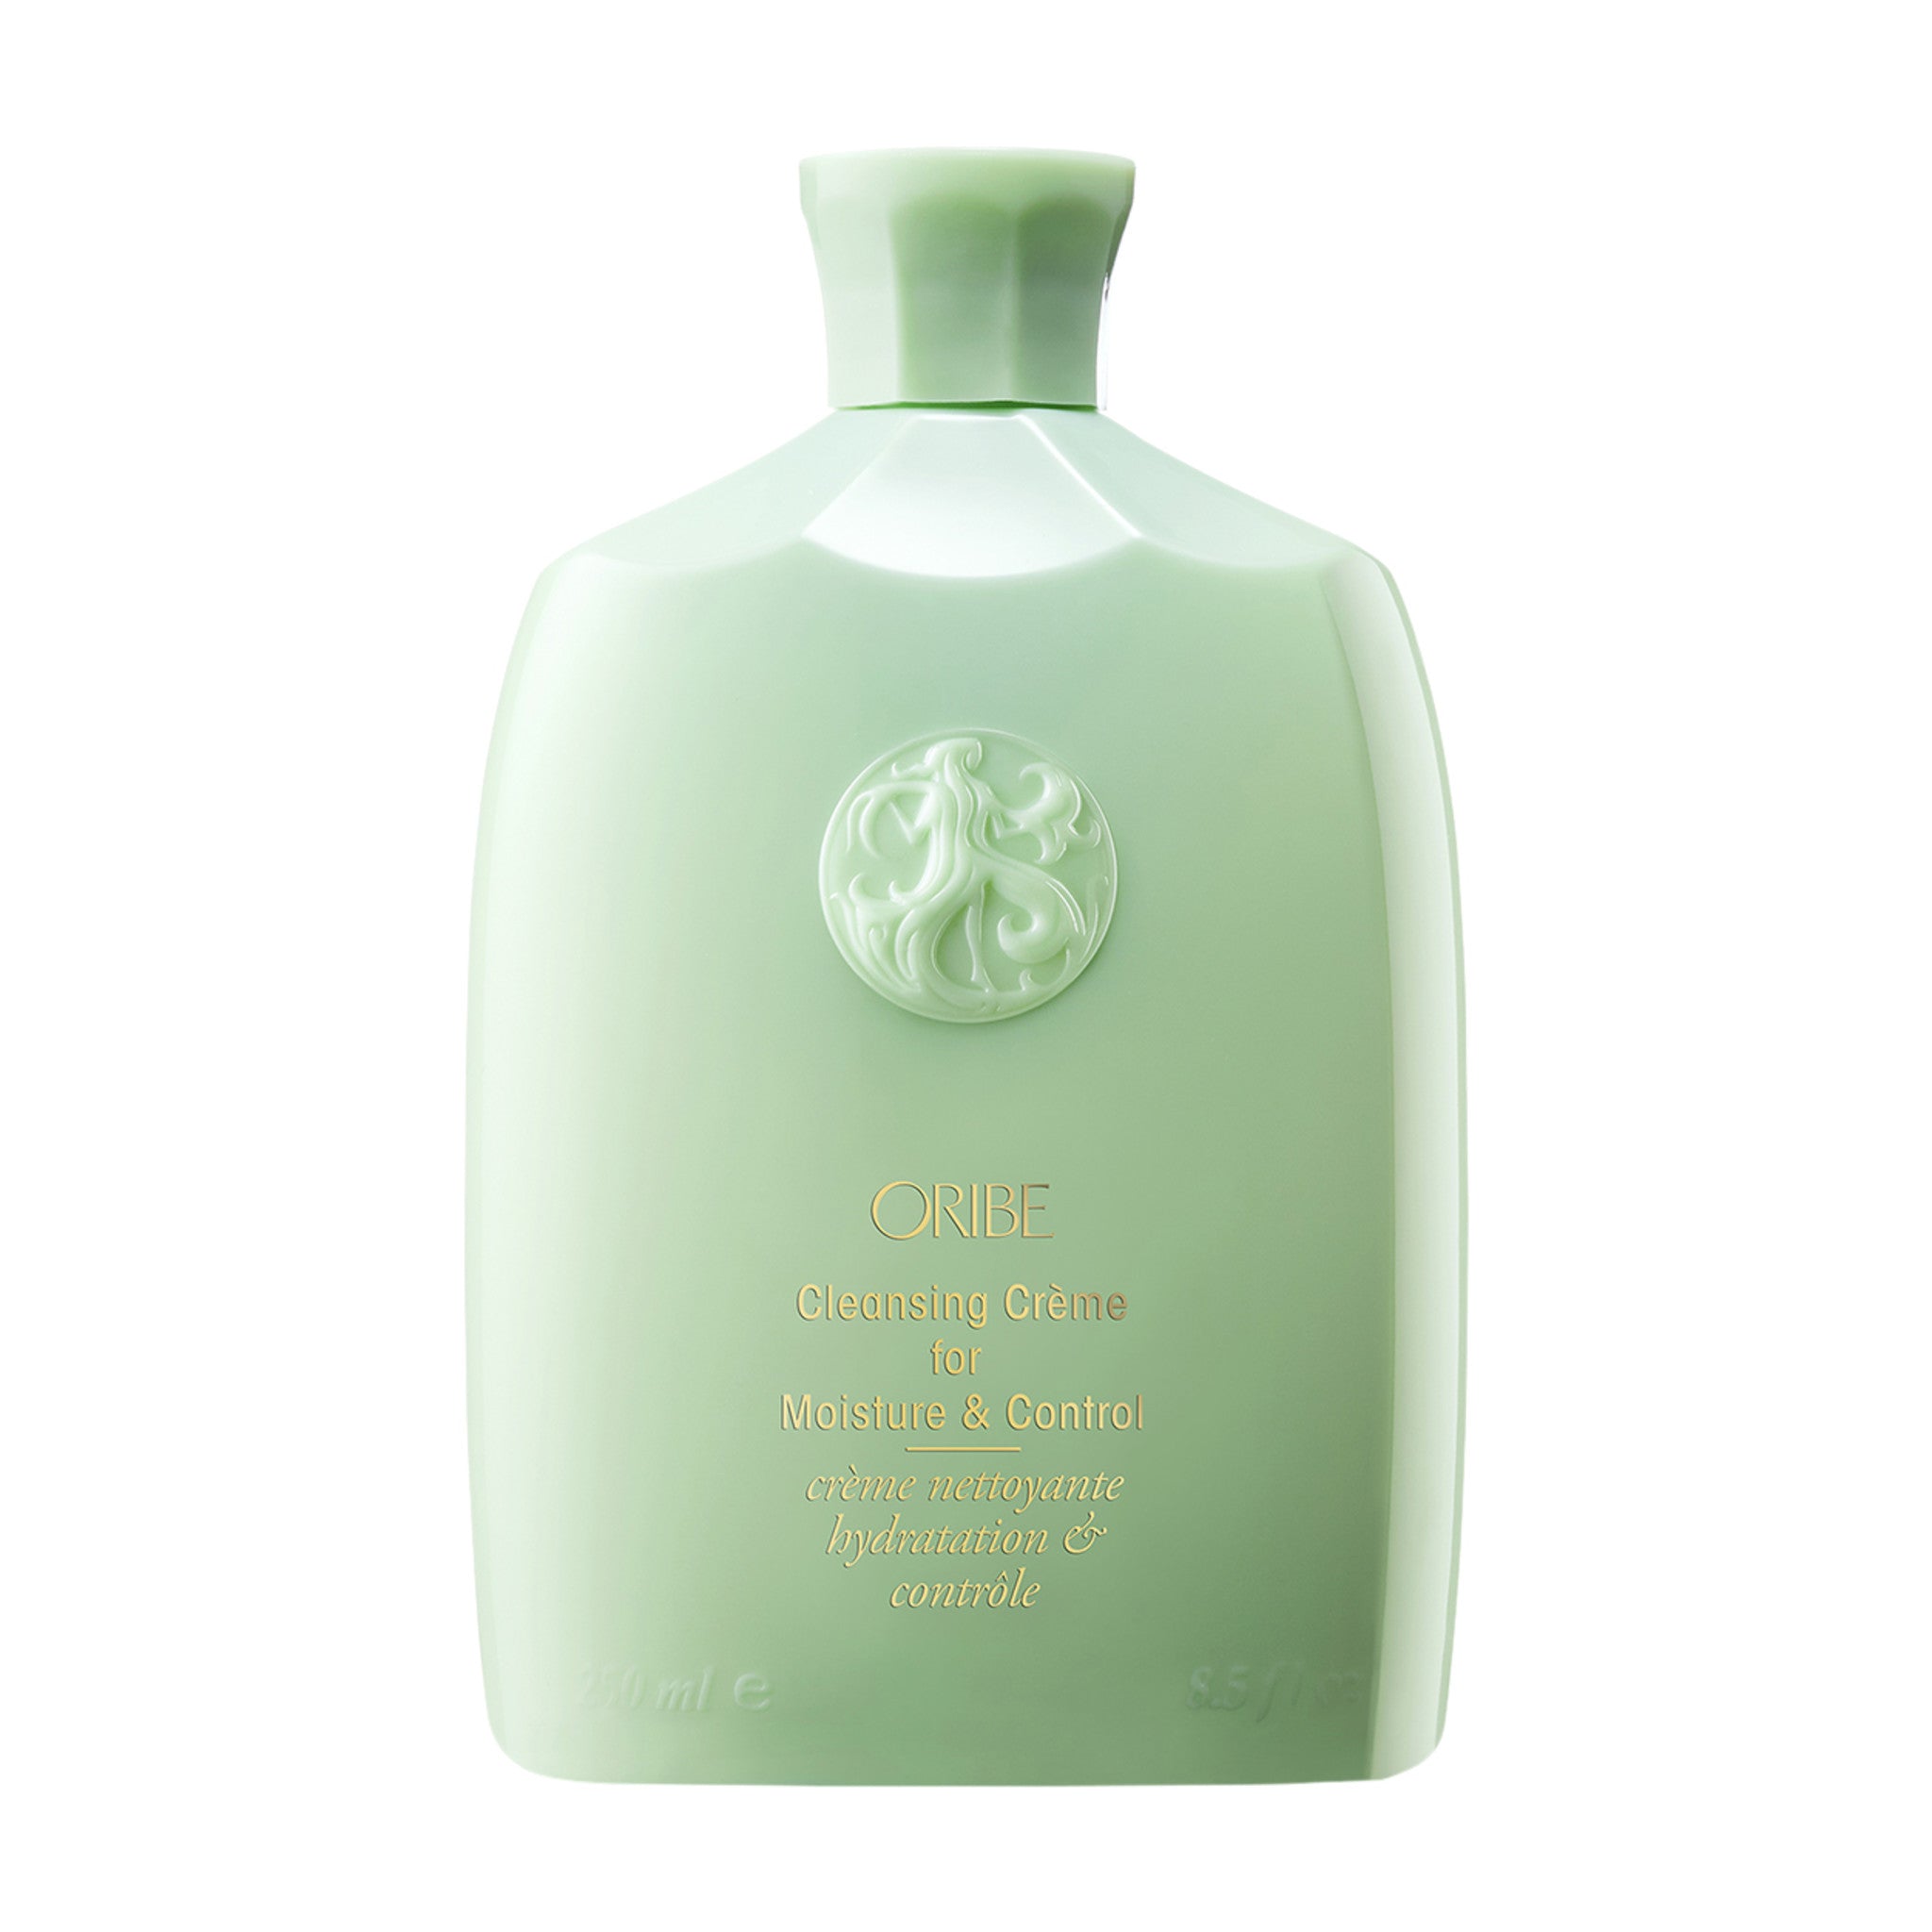 Oribe Cleansing Crème For Moisture and Control main image.